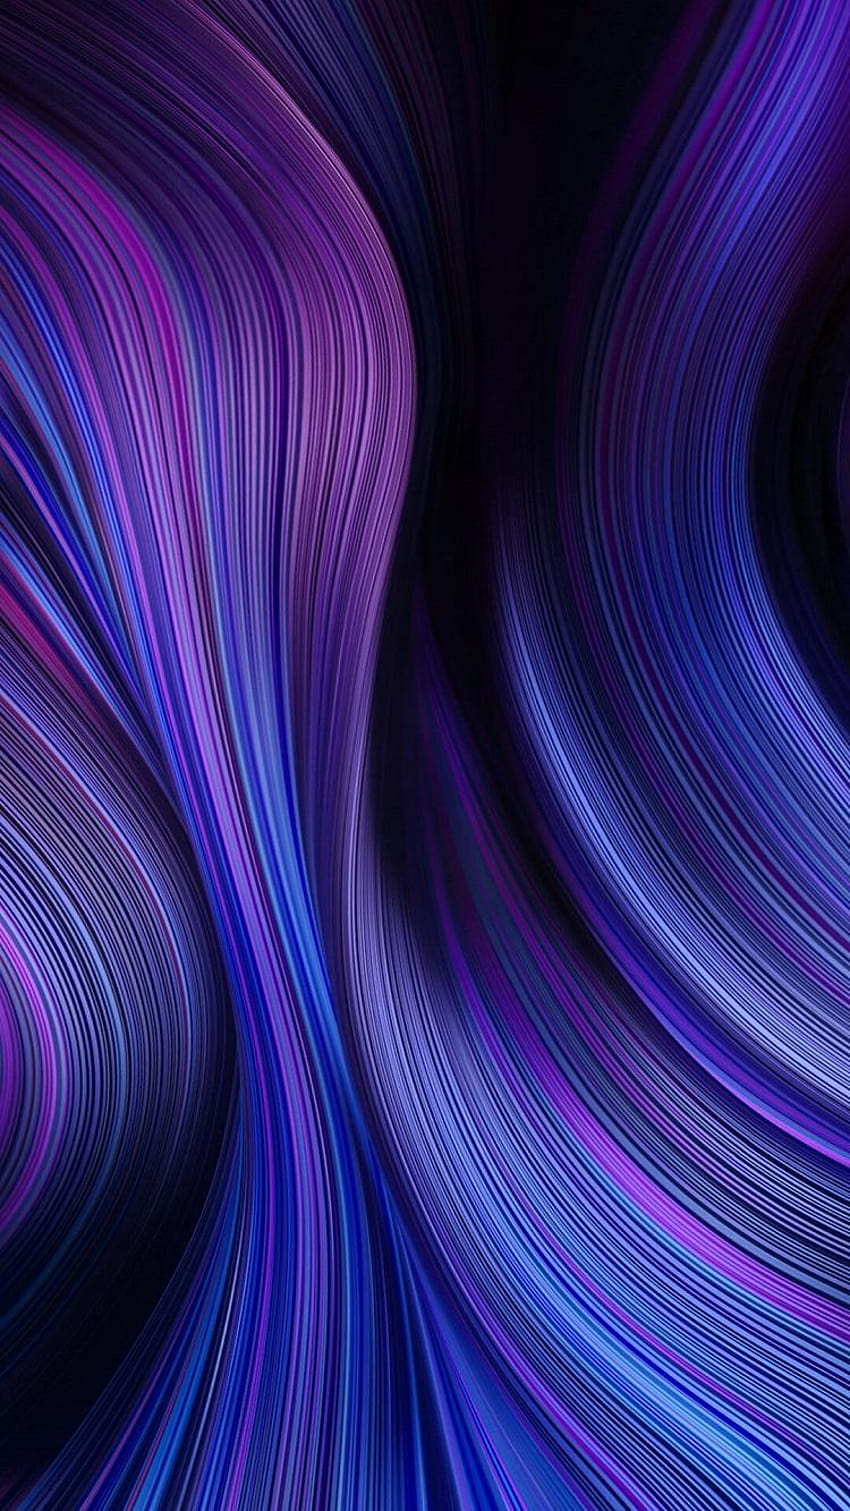 Redmi Note 9 for Android, mi note 9 pro HD phone wallpaper